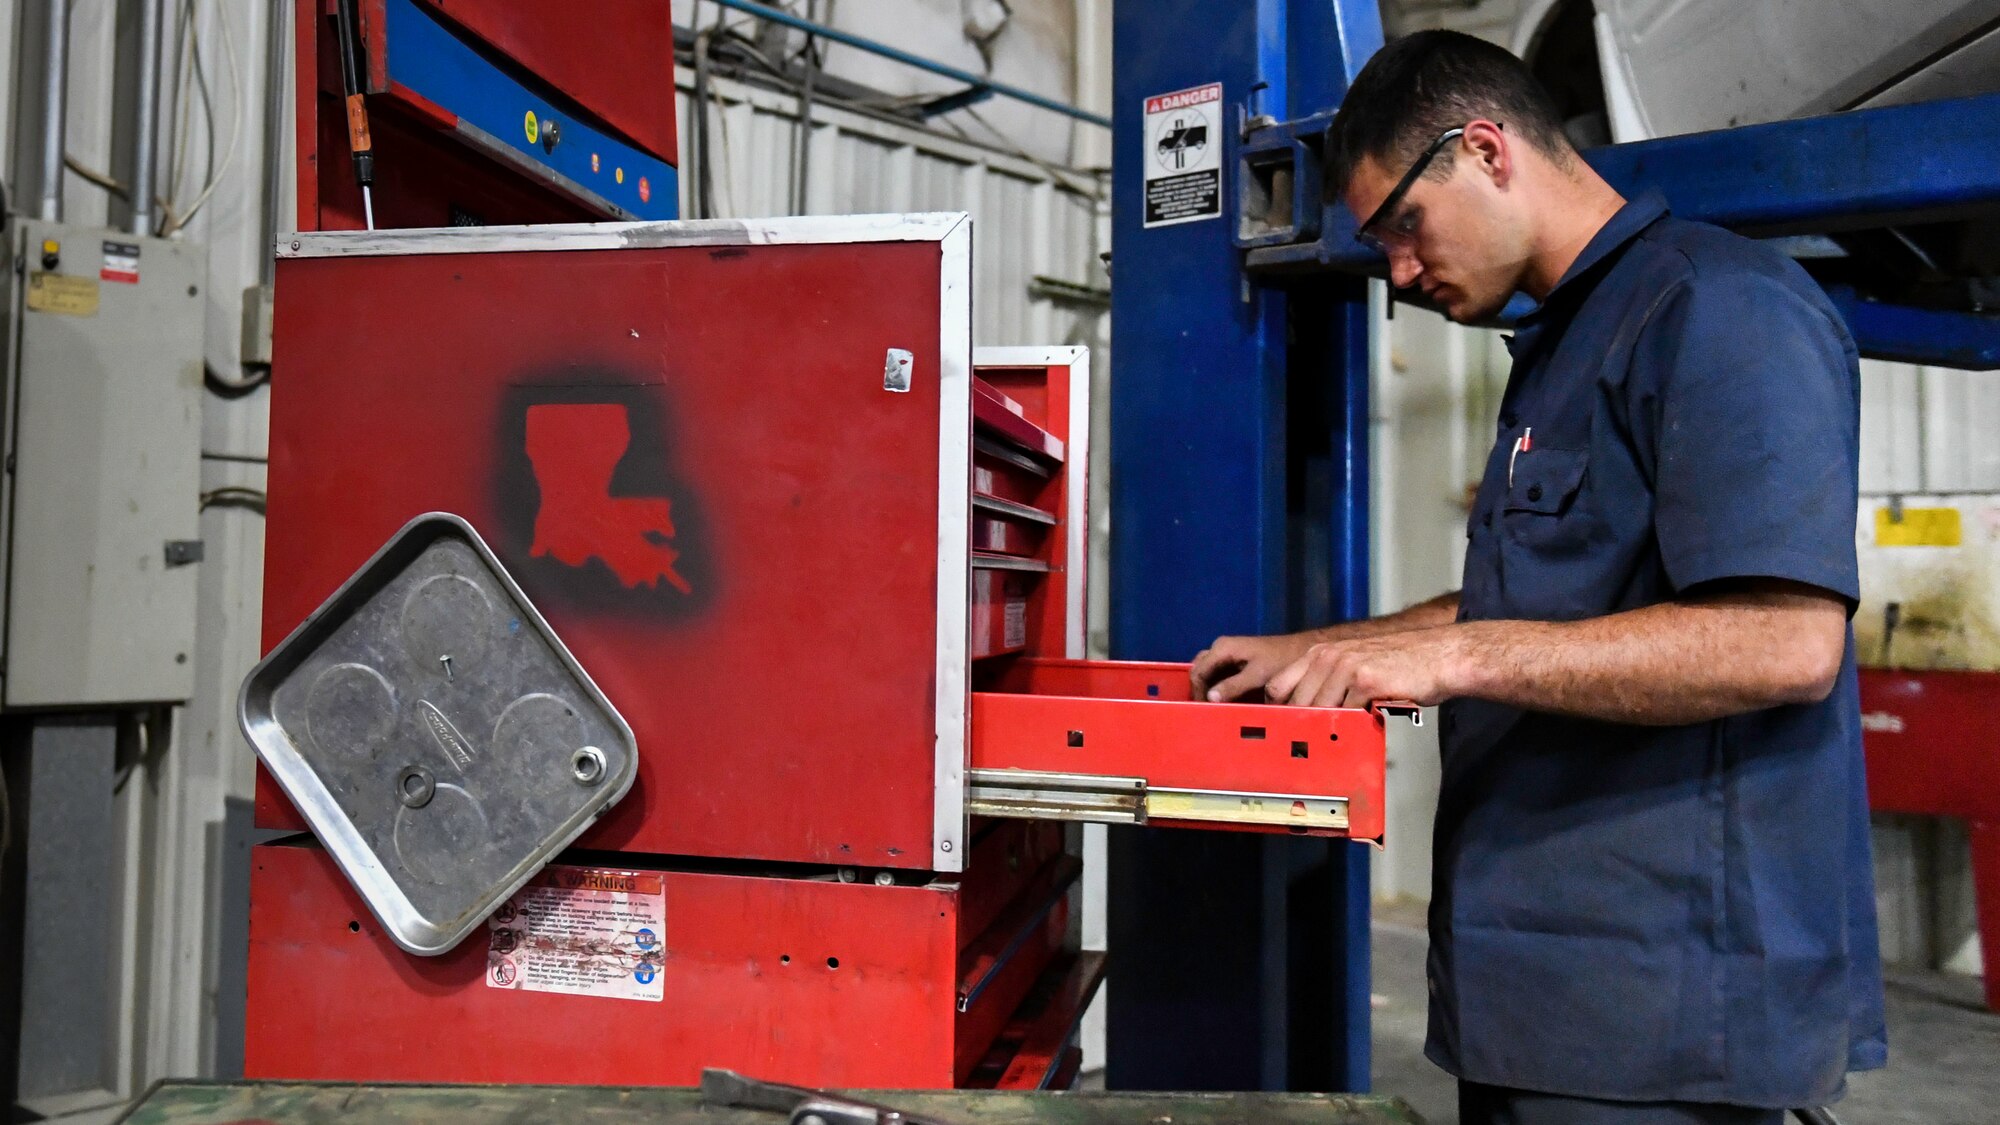 U.S. Air Force Senior Airman Darian O’Banion, 386th Expeditionary Logistics Readiness Squadron vehicle and equipment maintenance journeyman, searches for a tool in a toolbox at Ali Al Salem Air Base, Kuwait, July 29, 2019. Toolboxes each containing over 350 items necessary for the maintenance of vehicles and equipment on base, are assigned to individual Airmen. (U.S. Air Force photo by Staff Sgt. Mozer O. Da Cunha)